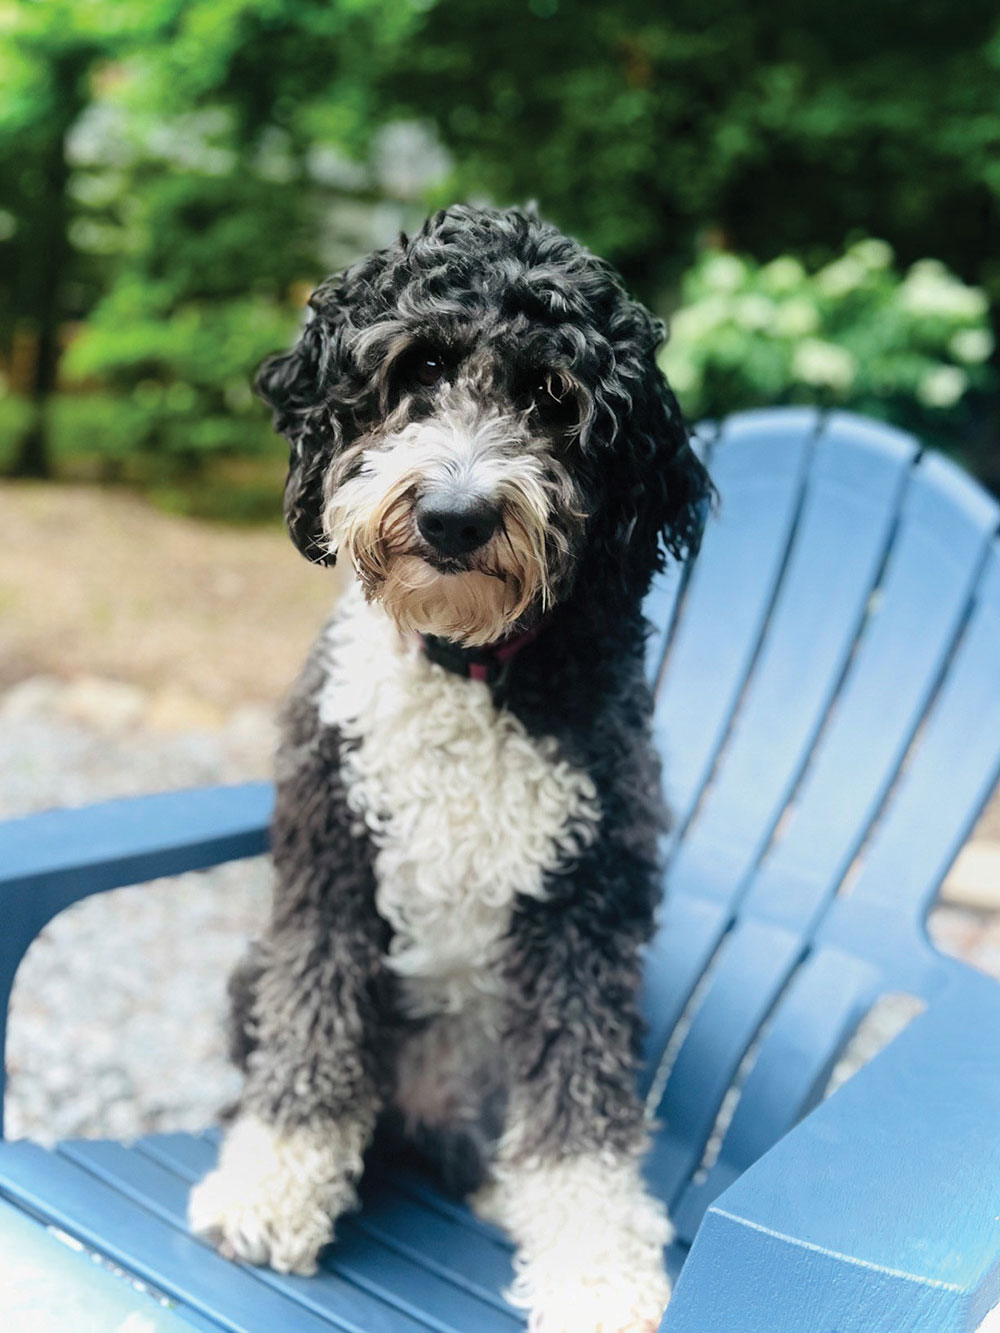 Wanda Mae, an Aussiedoodle, just turned 4. She is the most loving girl who adores children. We like to compare Wanda to the dog, Nana, from Peter Pan. She always watches over our kids. Submitted by Teresa.